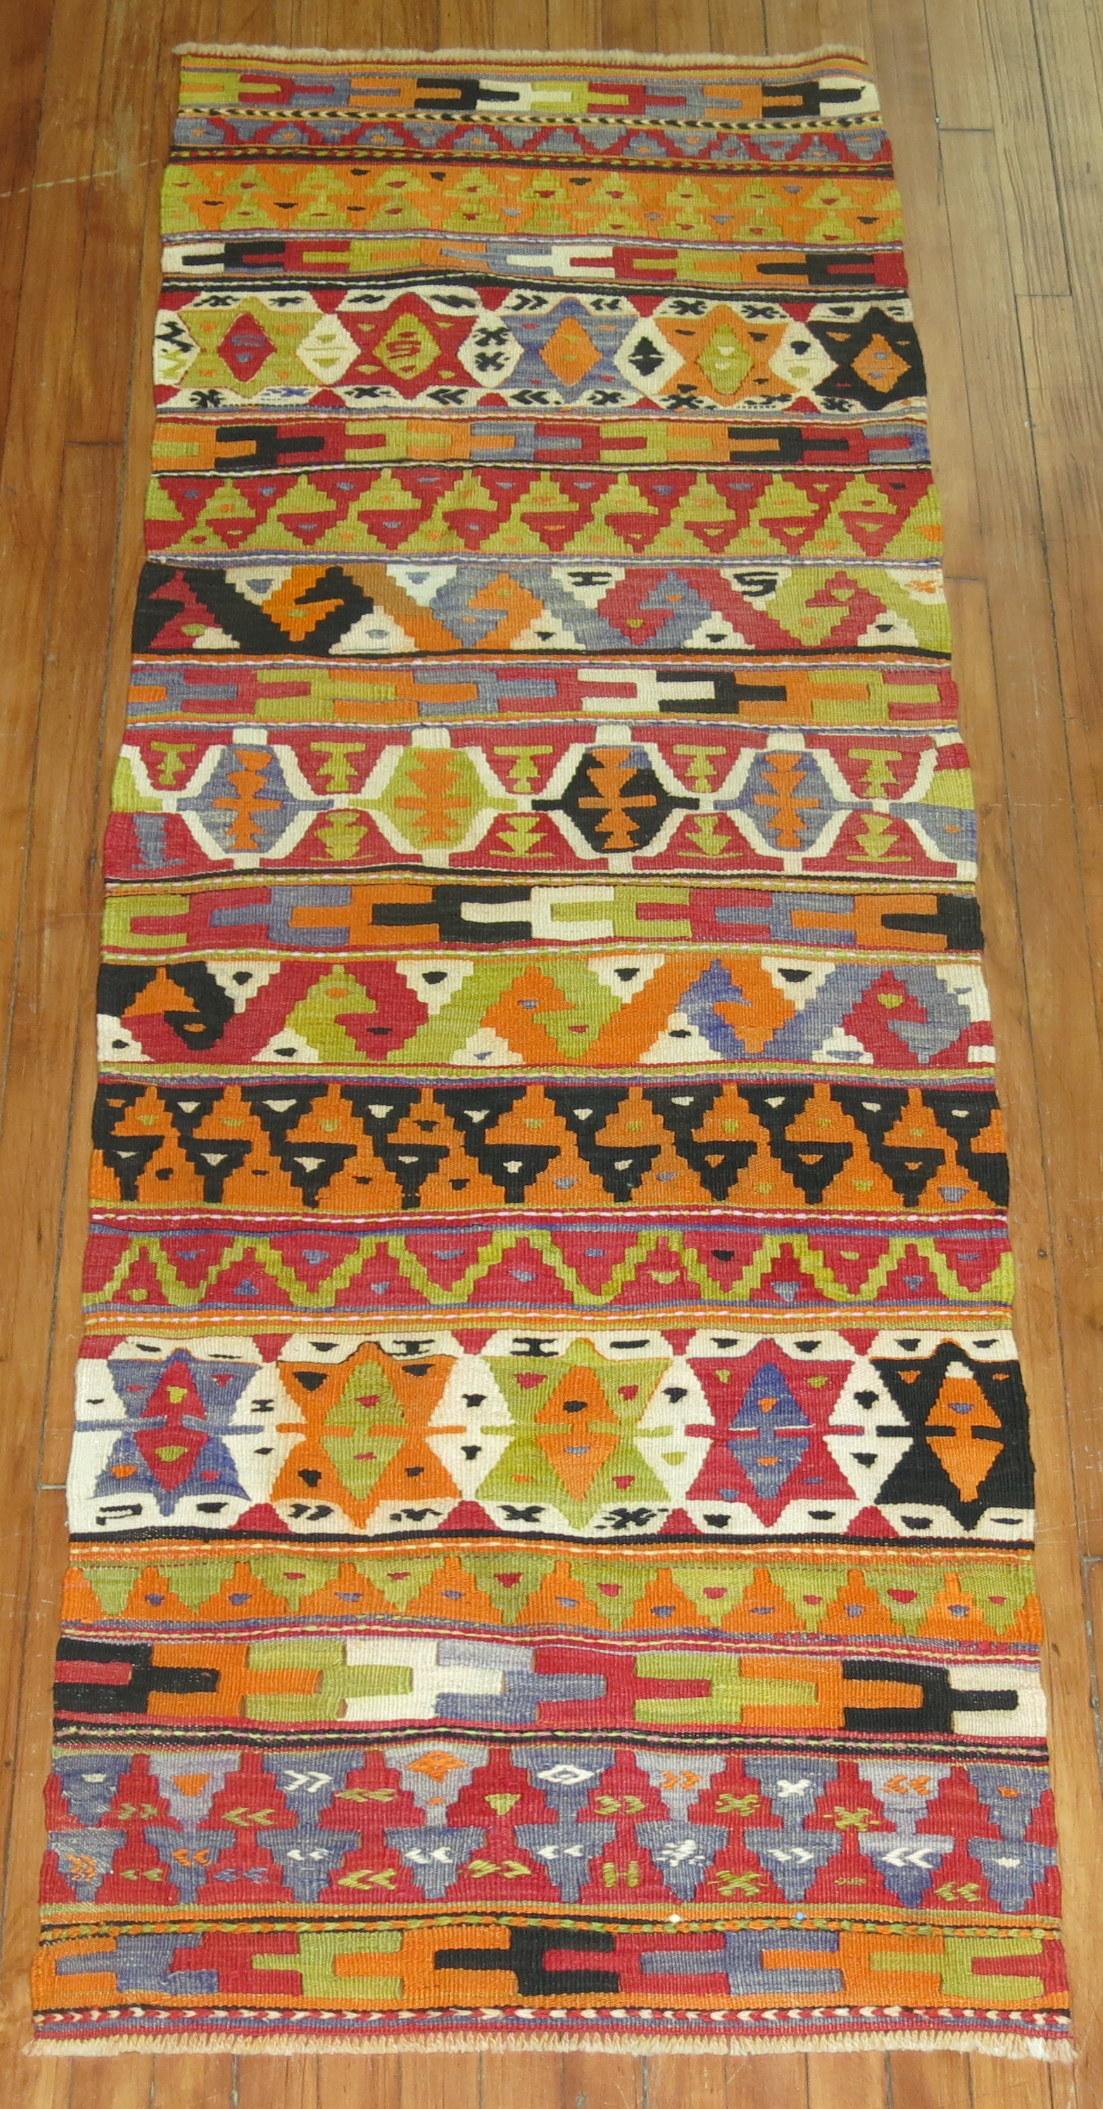 A one of a kind mid-20th century colorful Turkish Kilim runner.

2'6'' x 6'10''.